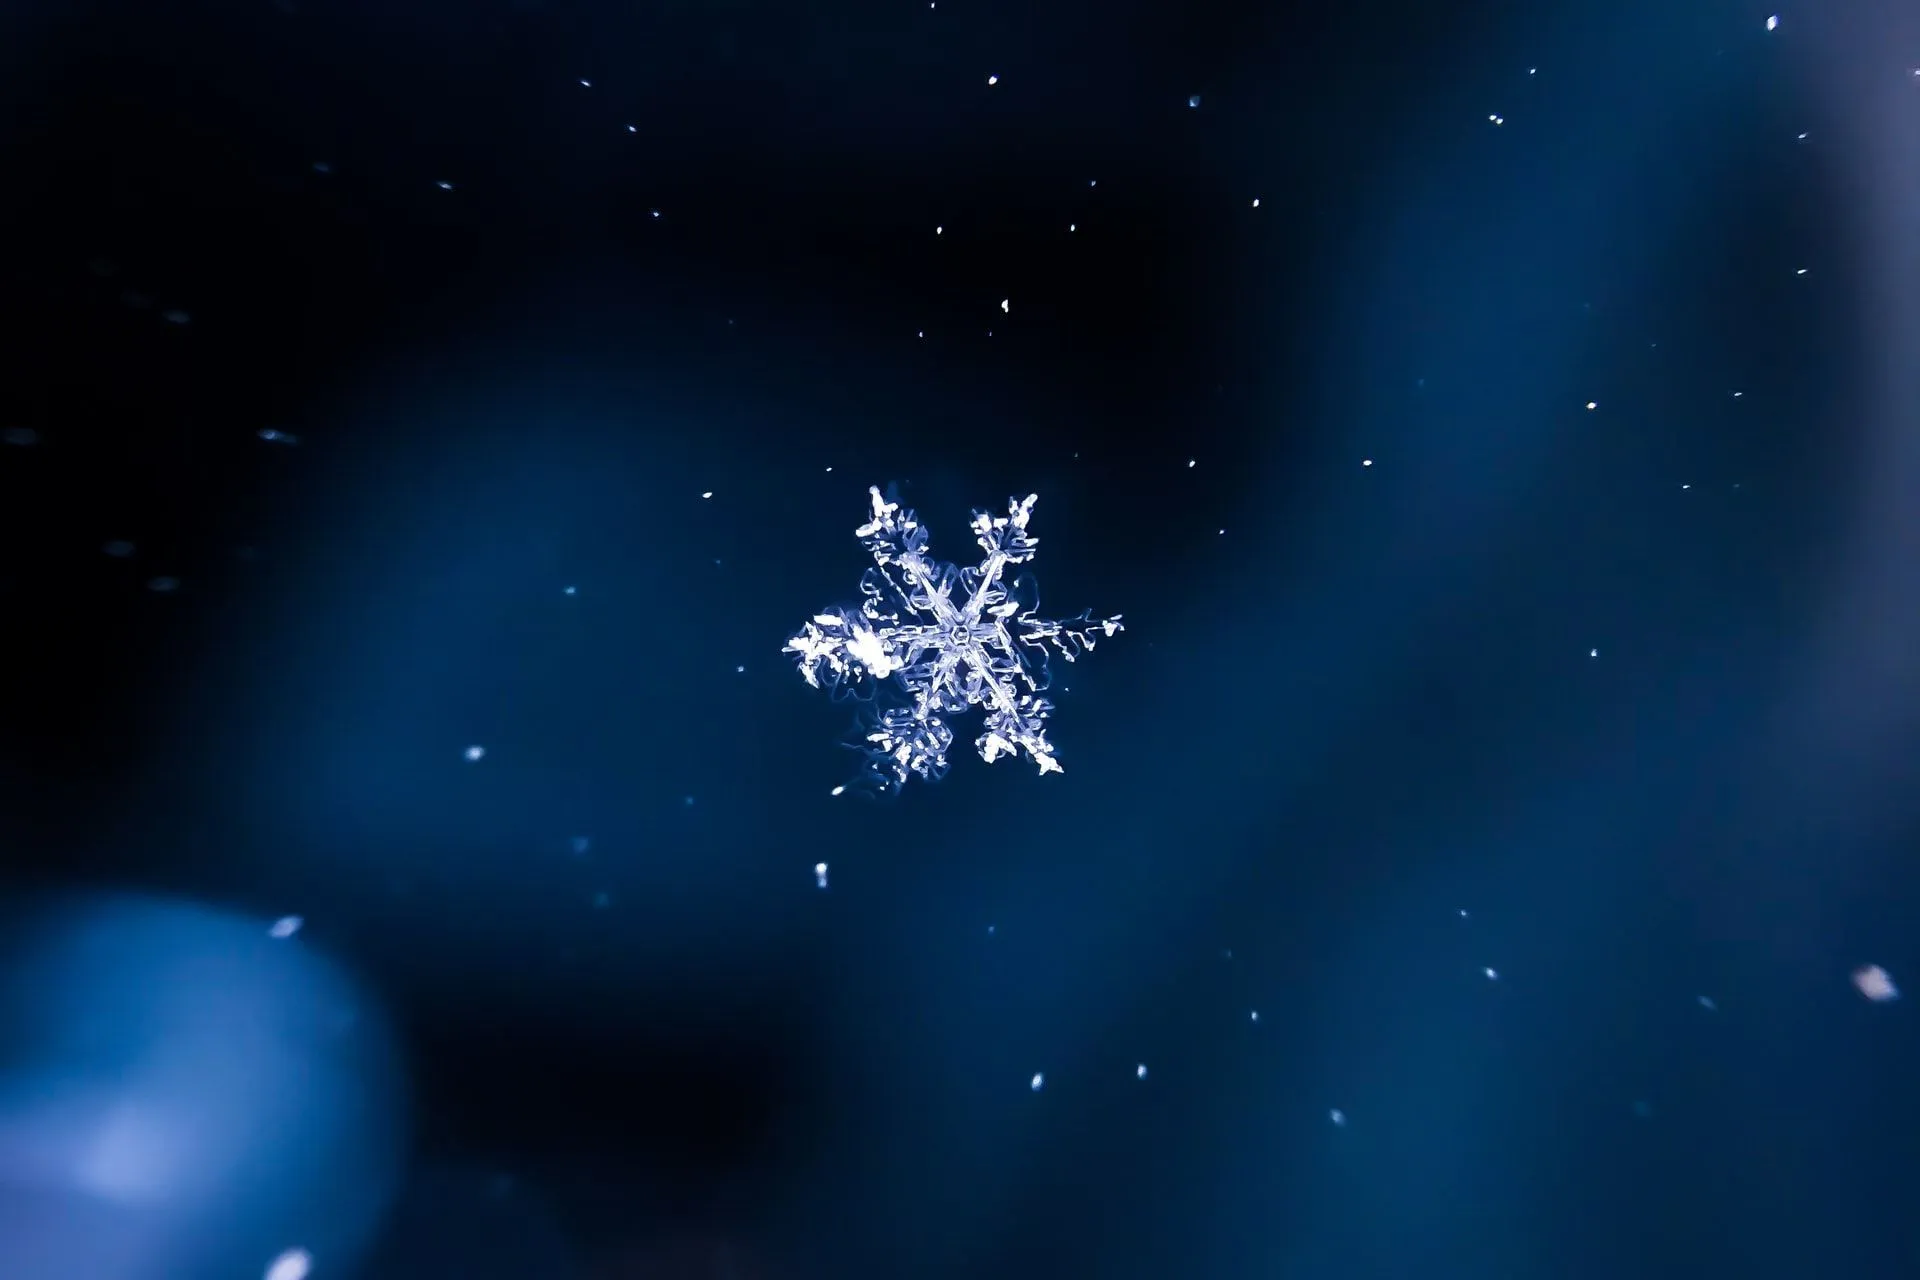 According to the famed Guinness Book of World Records, the largest snowflake in the world was 15 in (38 cm) broad and 8 in (20 cm) thick, documented by Matt Coleman on January 28, 1887, at Fort Keogh, Montana.